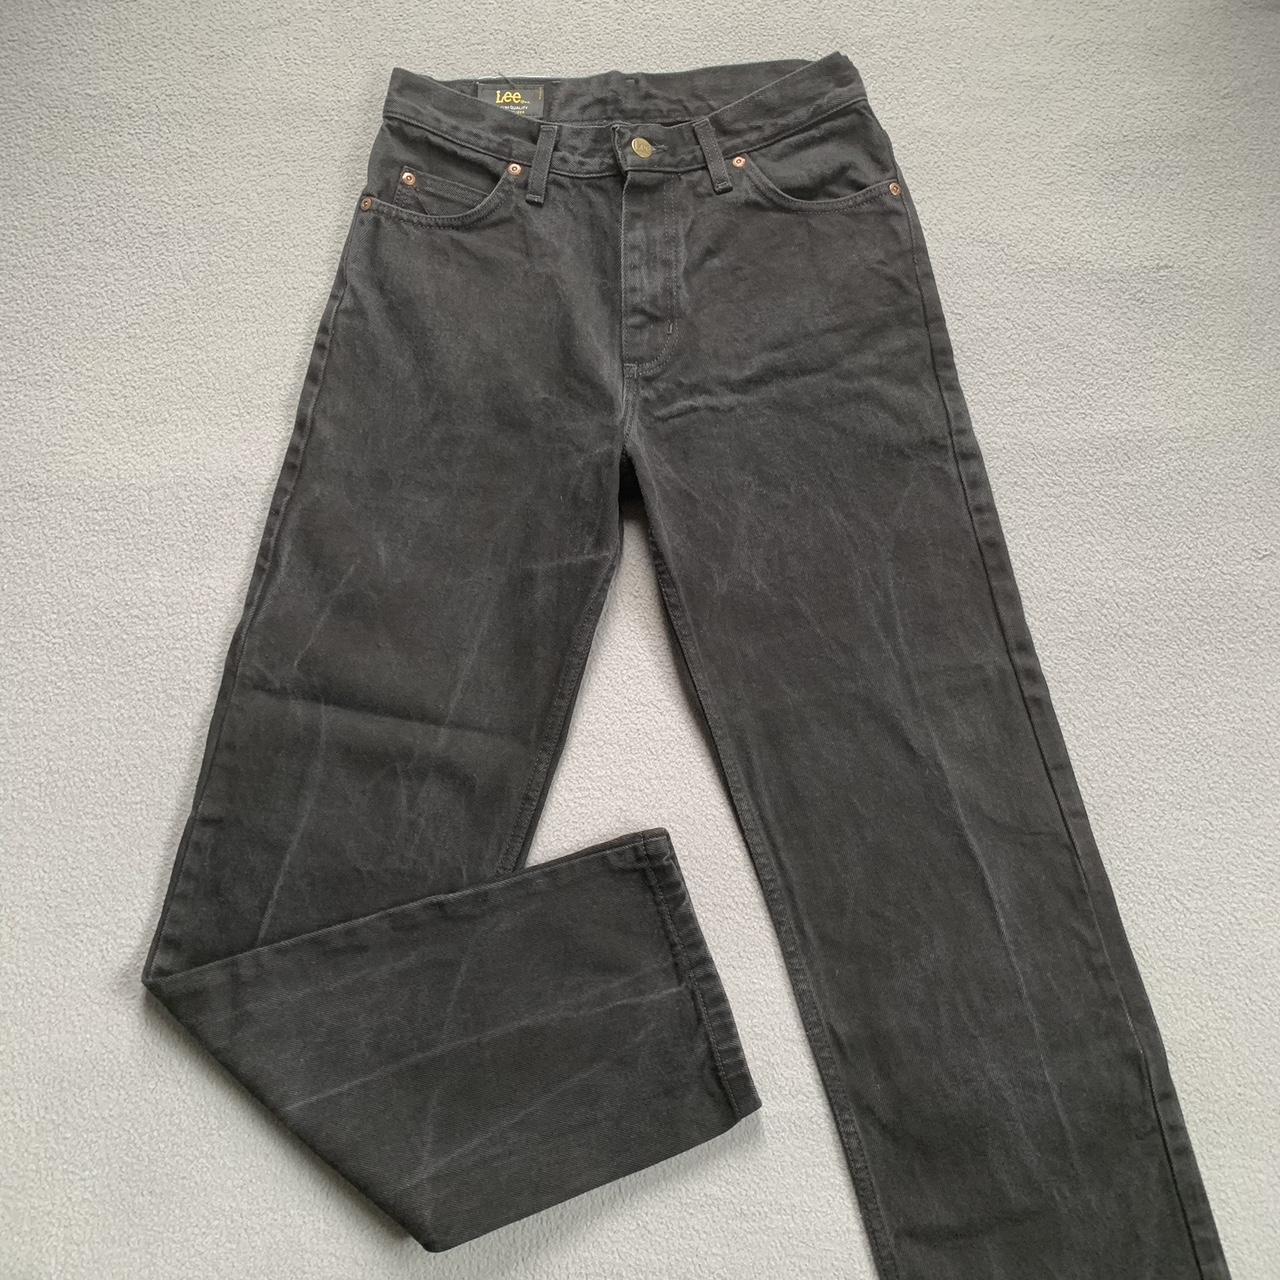 Vintage lee Brooklyn jeans in a faded washed out... - Depop